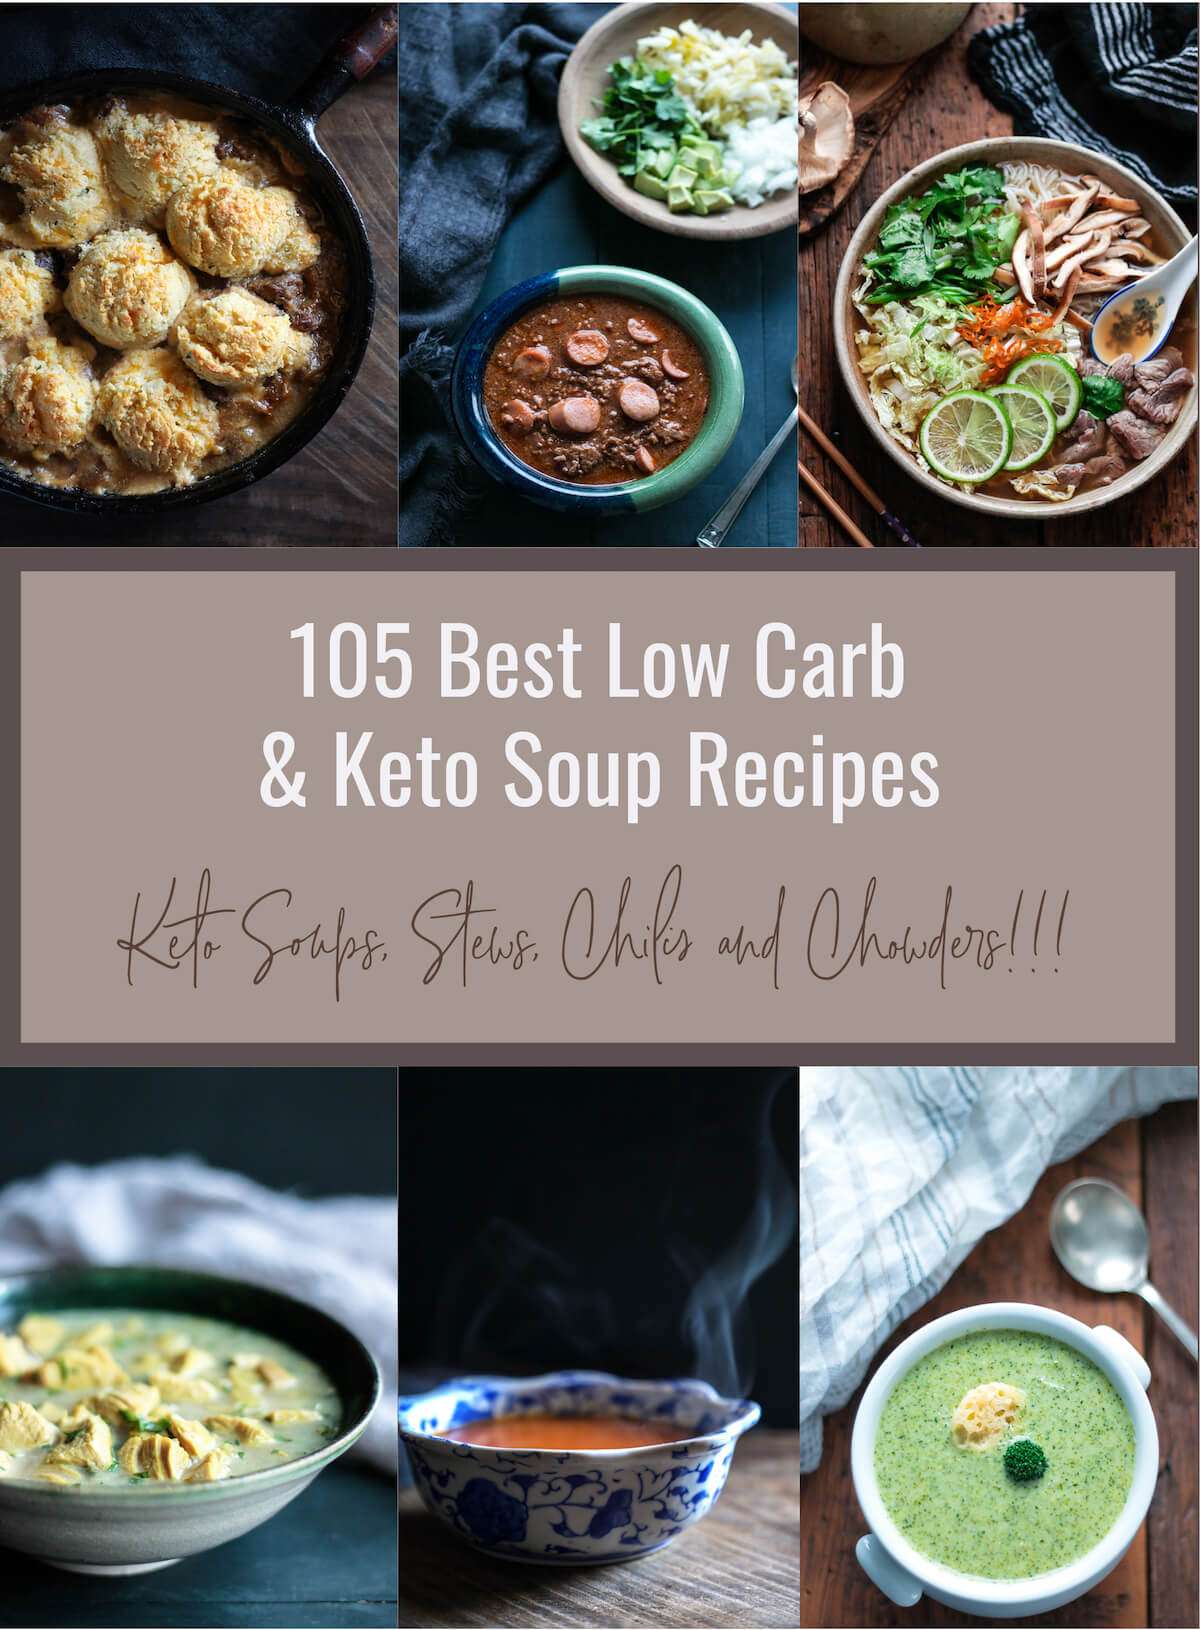 10 Best Low Carb Soup Recipes for Fall